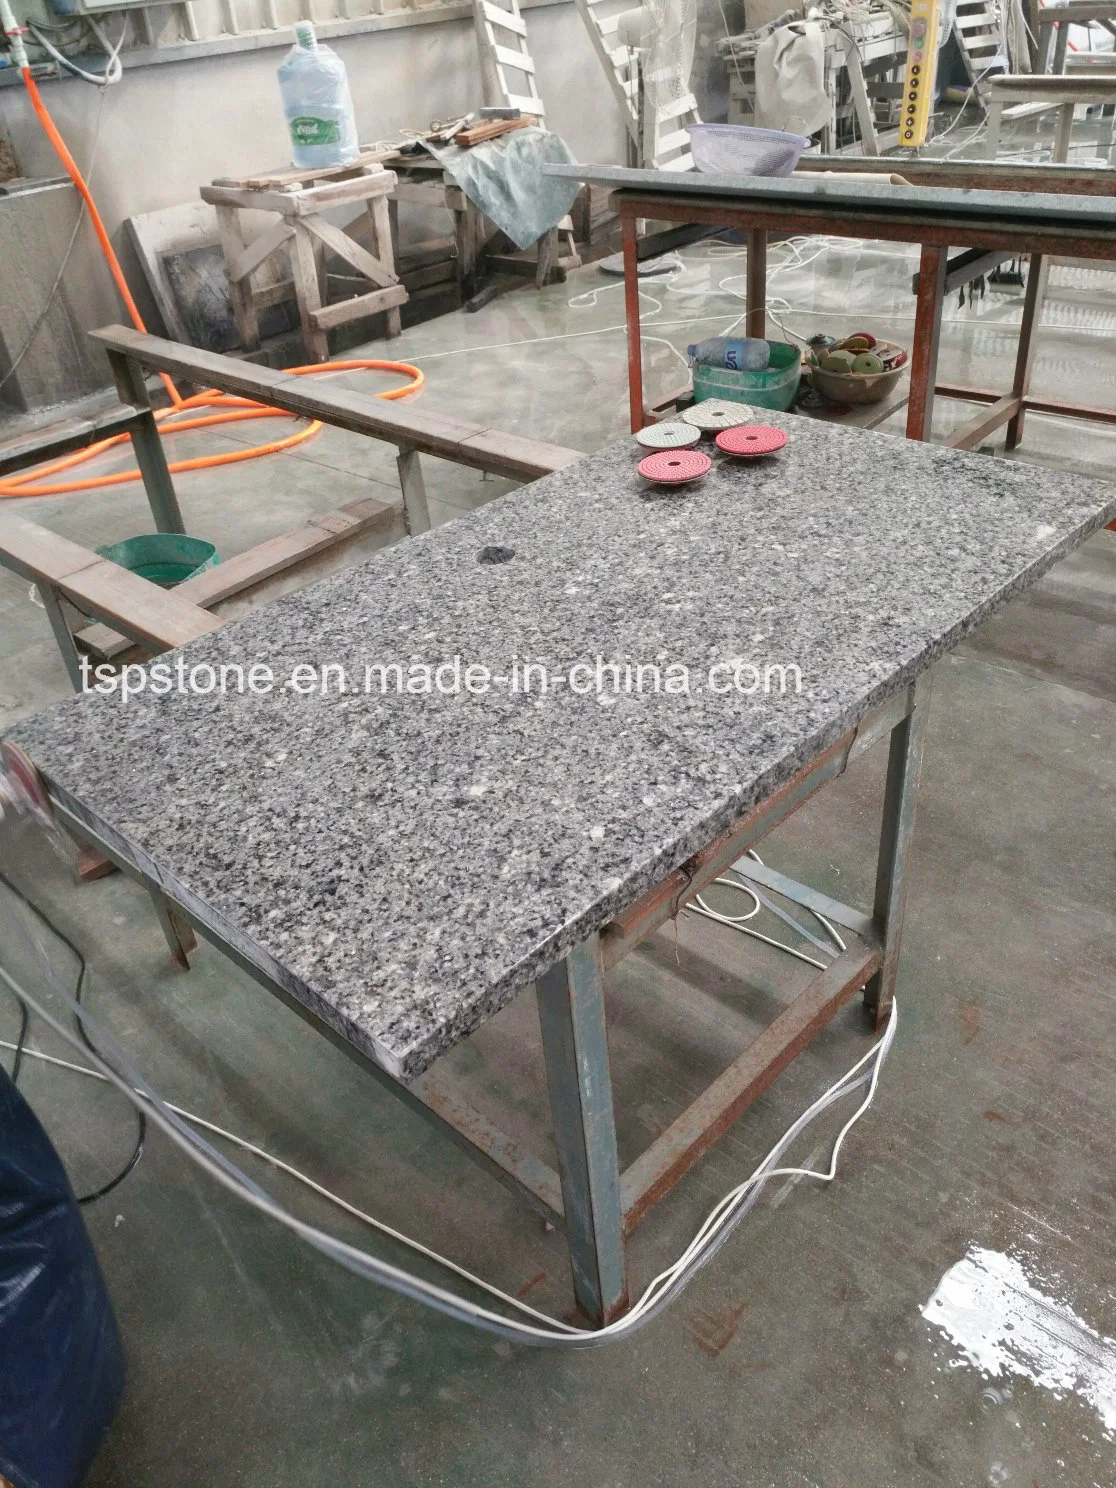 Hot Sale Granite/Marble Stone Round Coffee/Dining Table Top for Restaurant Table Furniture